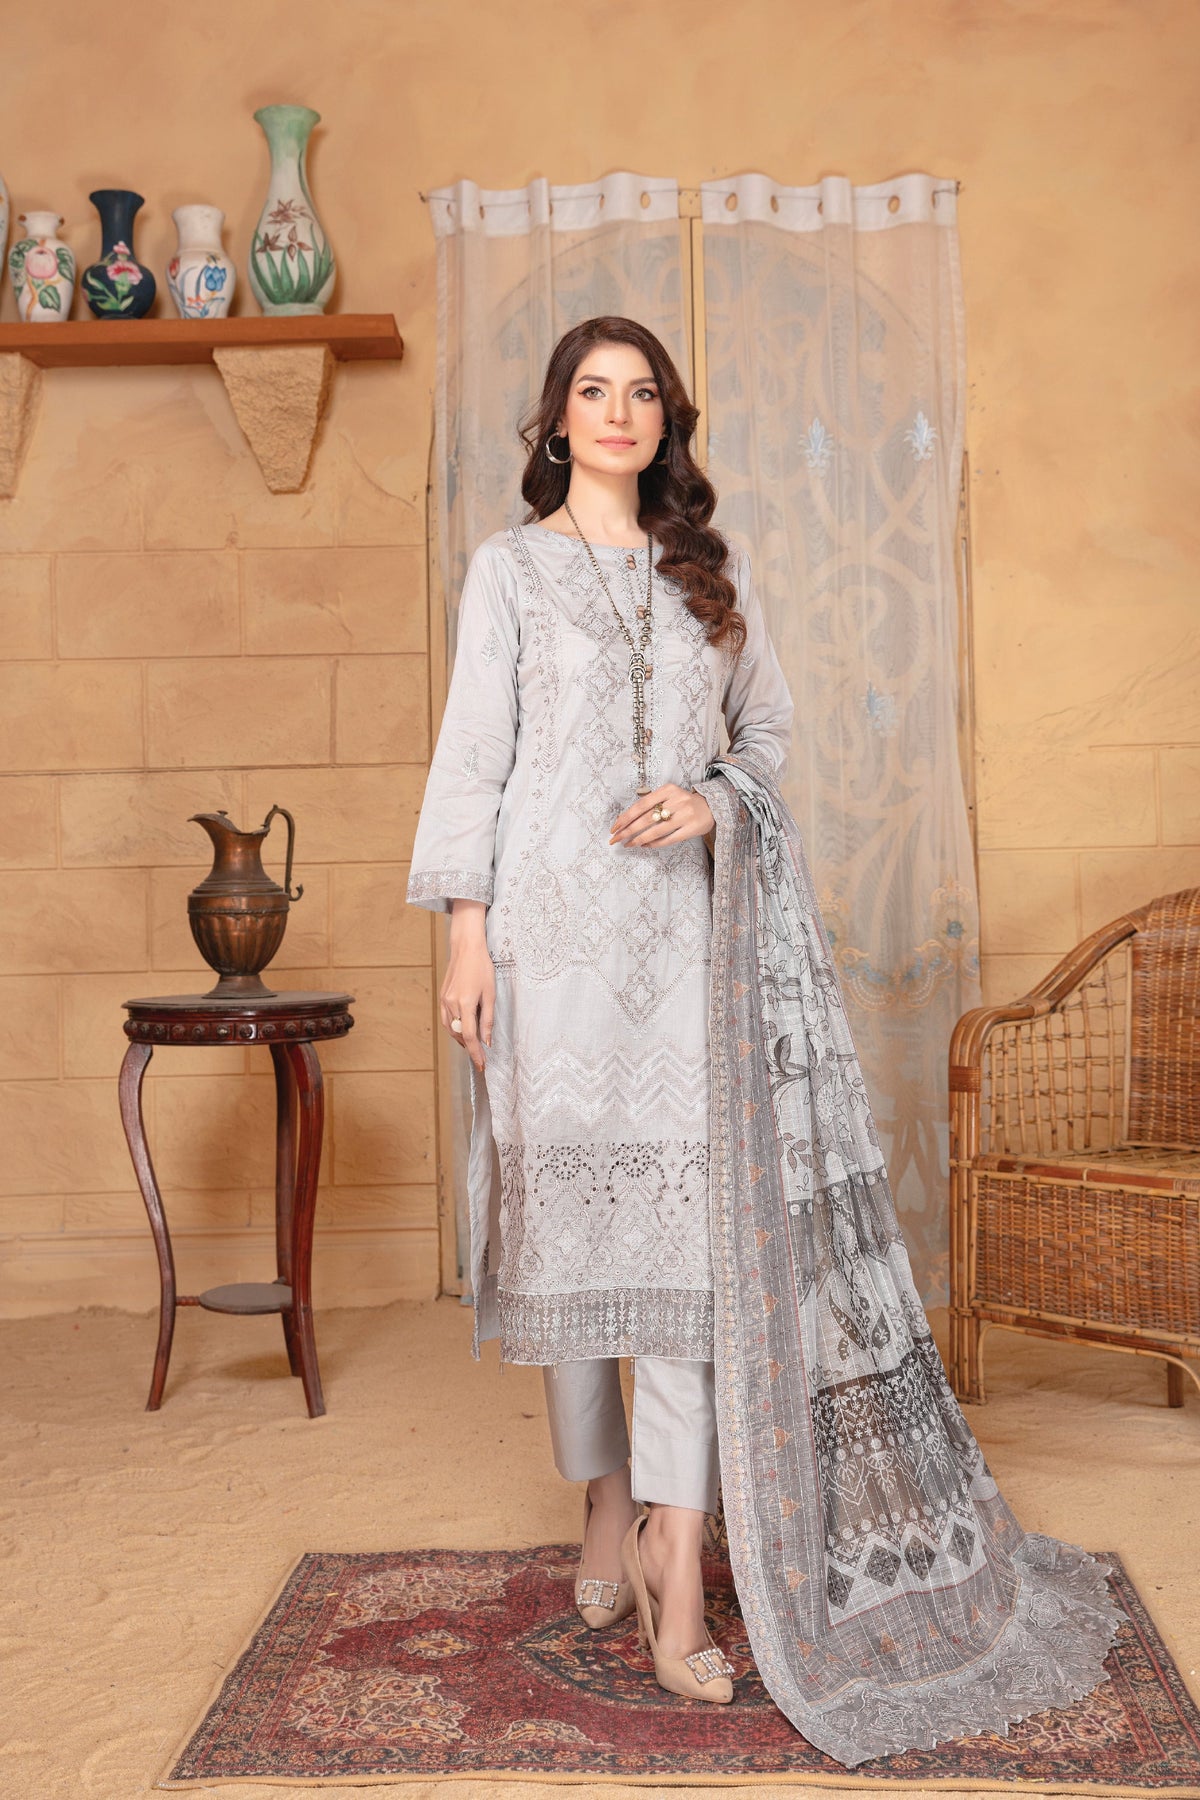 Misl-E-Gull By Mah e Rooh Lawn Embroidered Suit MG-6602 Gray